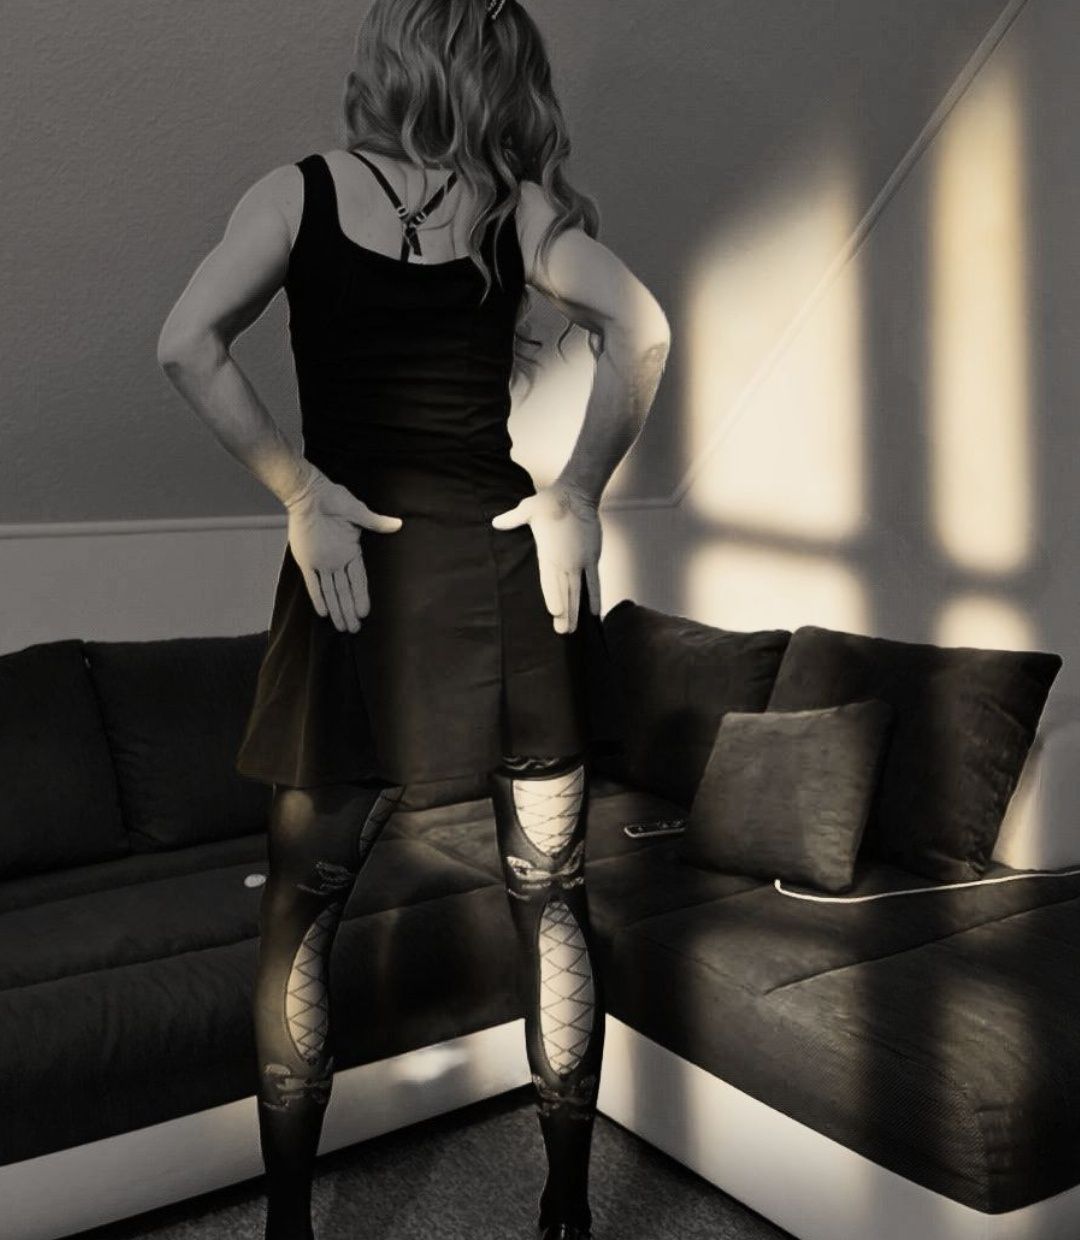 Photoshooting with my new Skirt #6